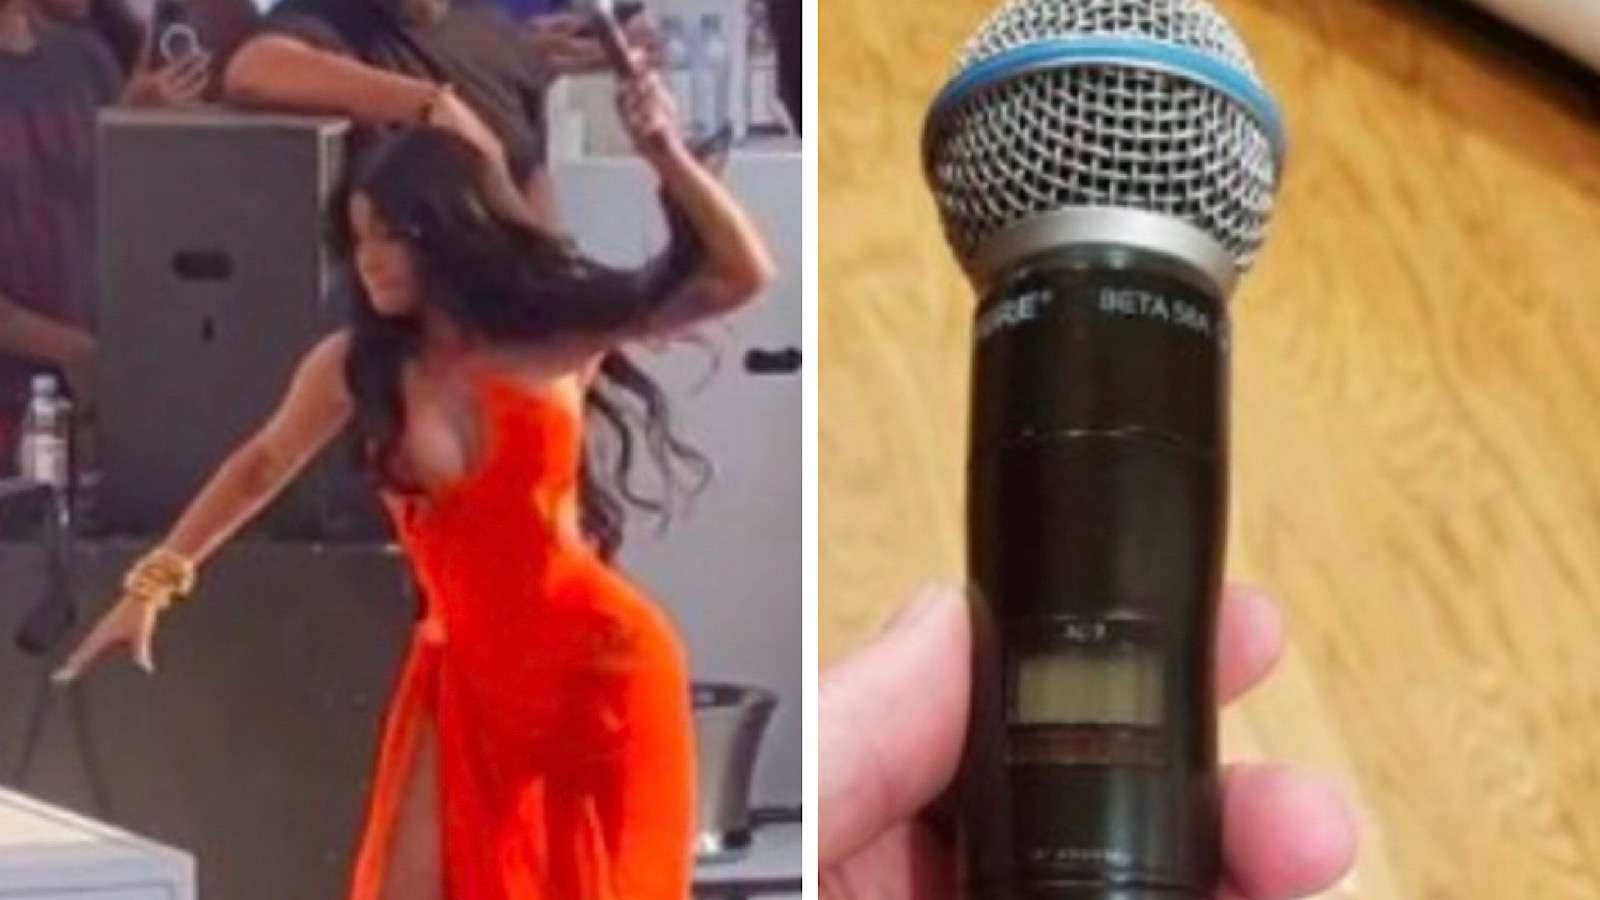 Cardi B throws a microphone at a fan for splashing the rapper with water.